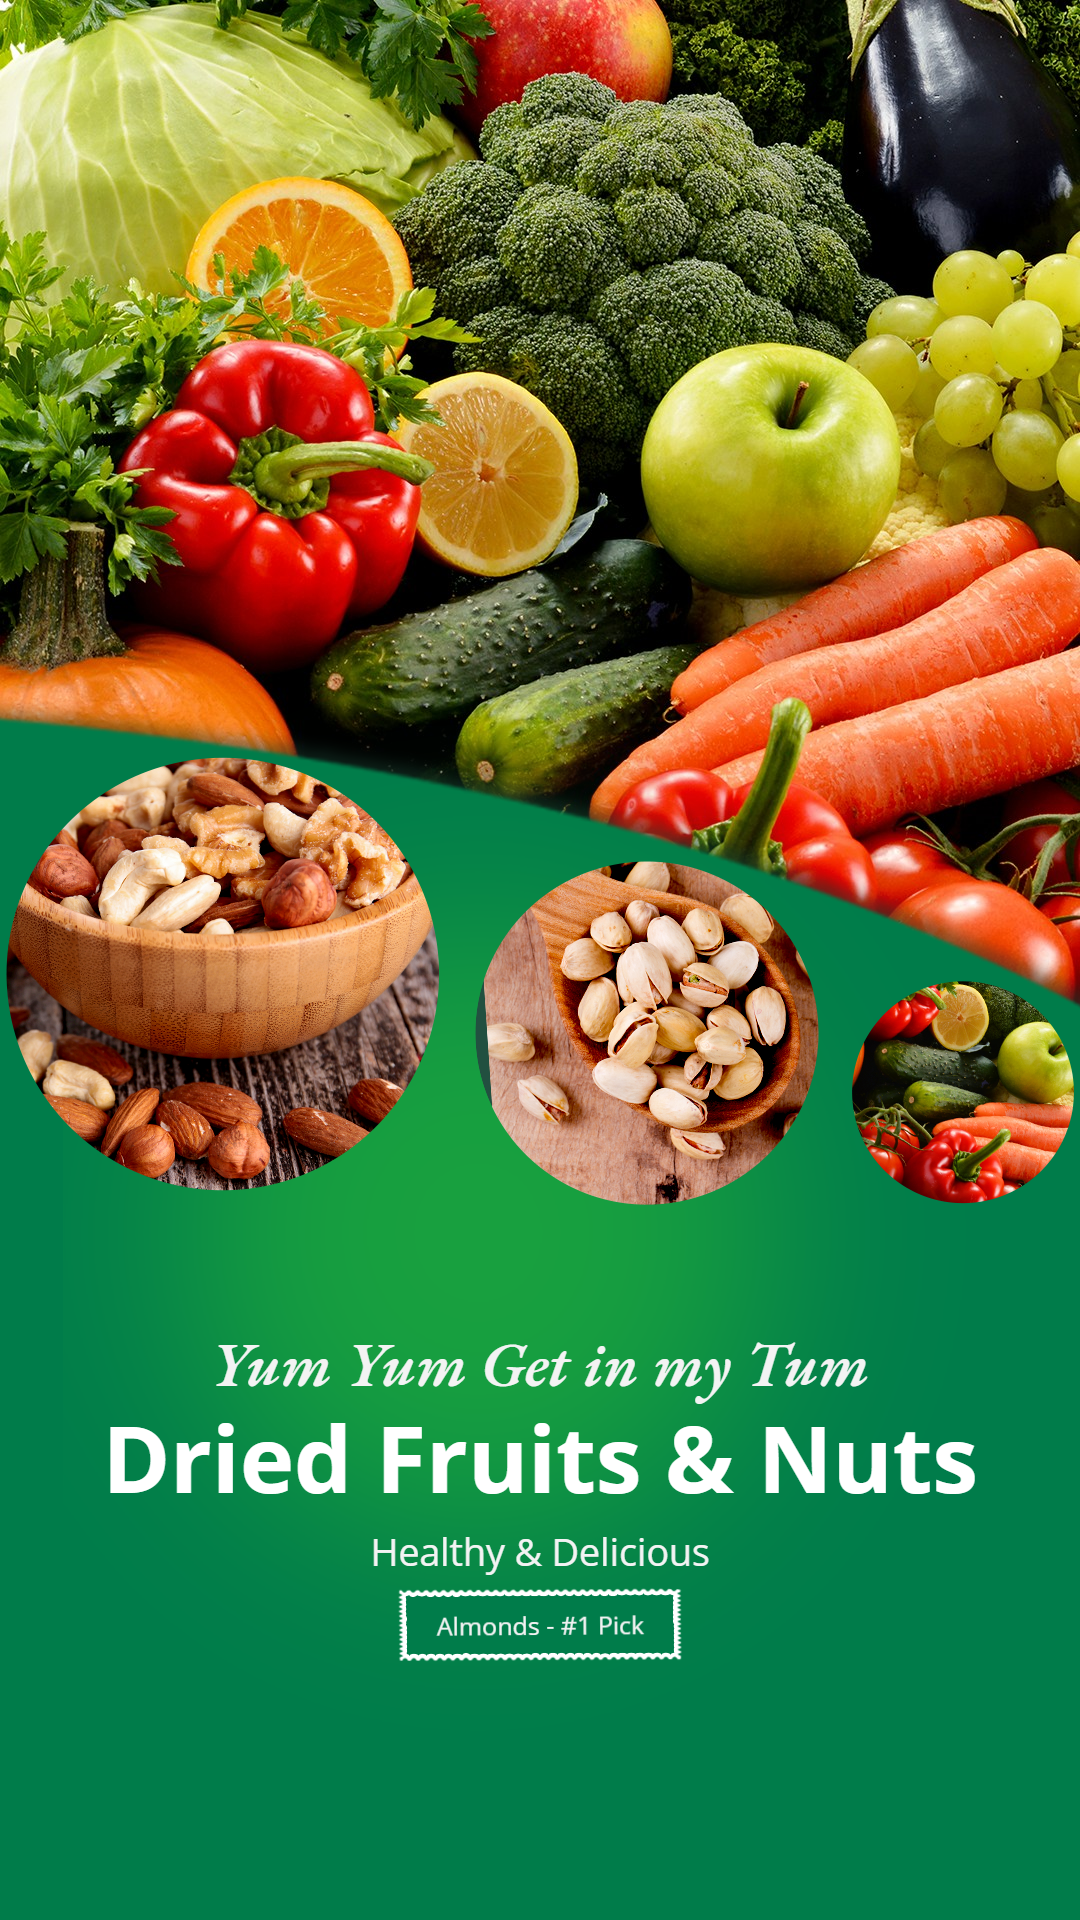 Nuts and Dried Fruit Wholesale Promotion Ecommerce Story